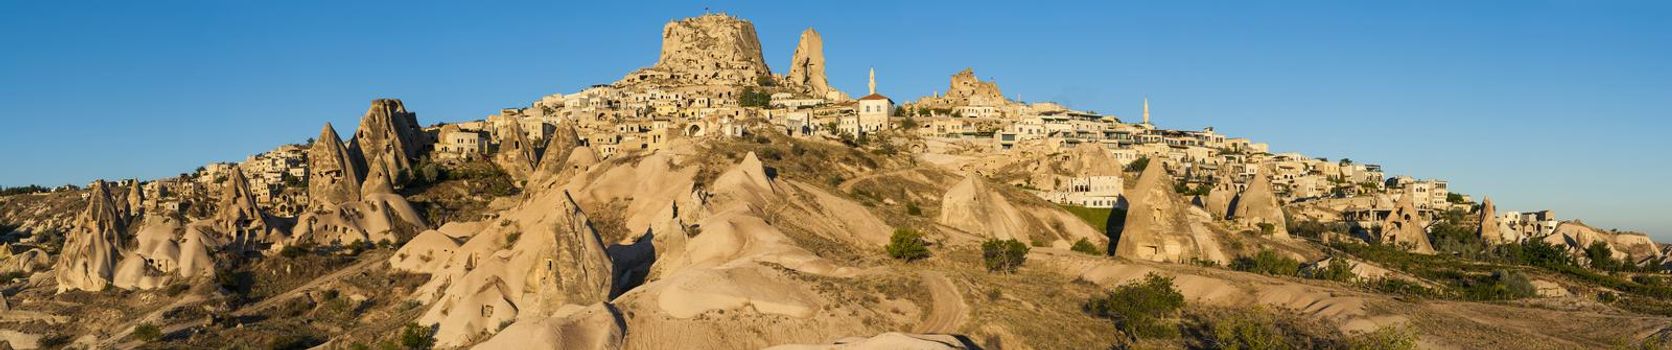 Ancient town and a castle of Uchisar dug from a mountains after sunrise, Cappadocia, Turkey.Panorama